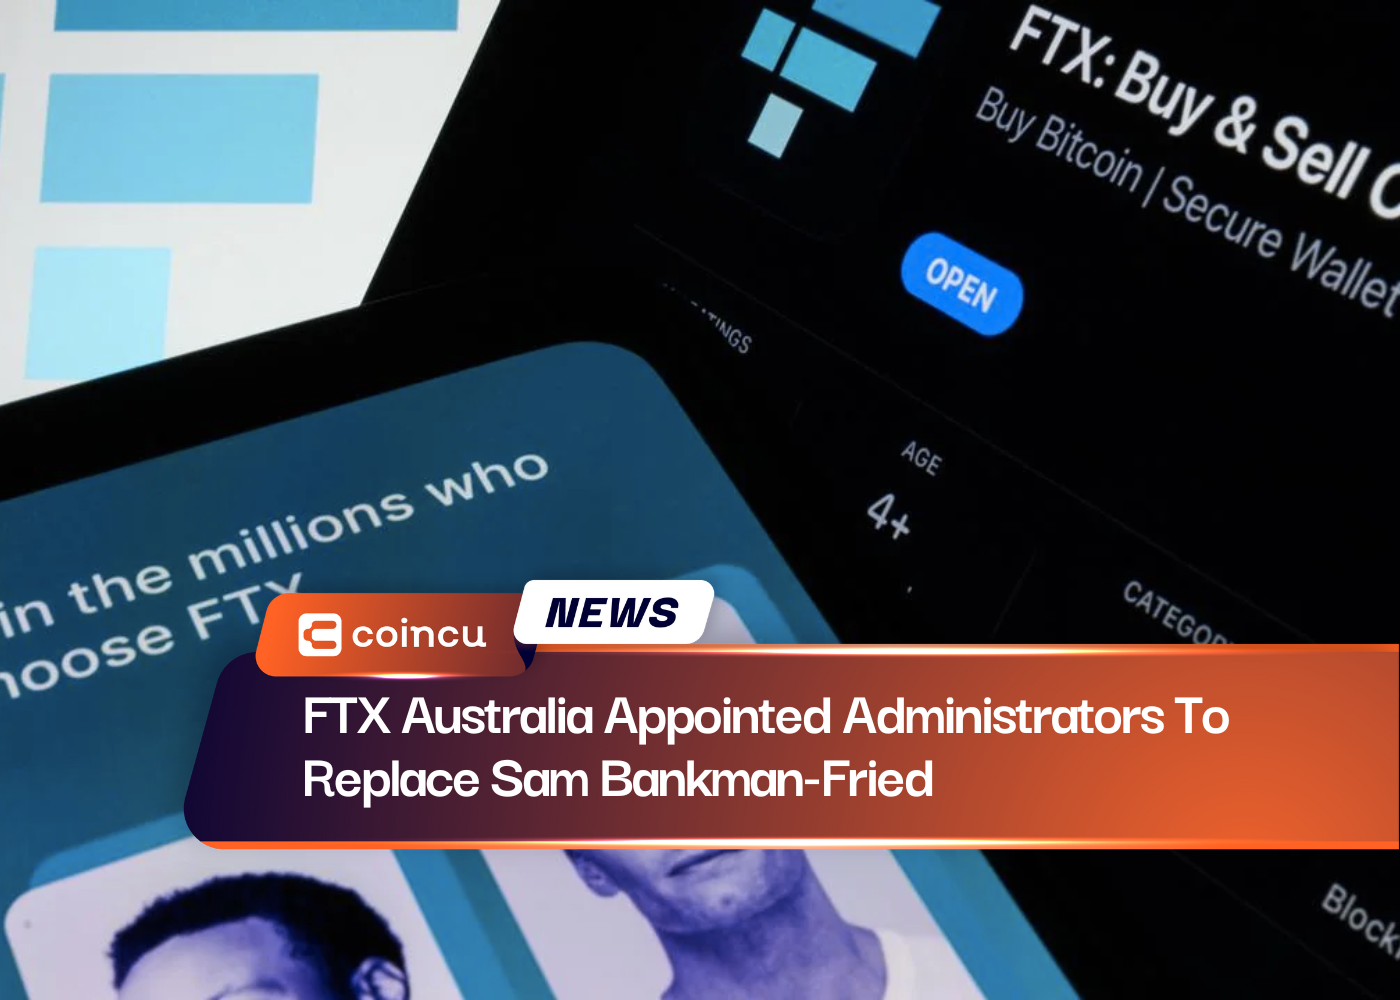 FTX Australia Appointed Administrators To Replace Sam Bankman-Fried